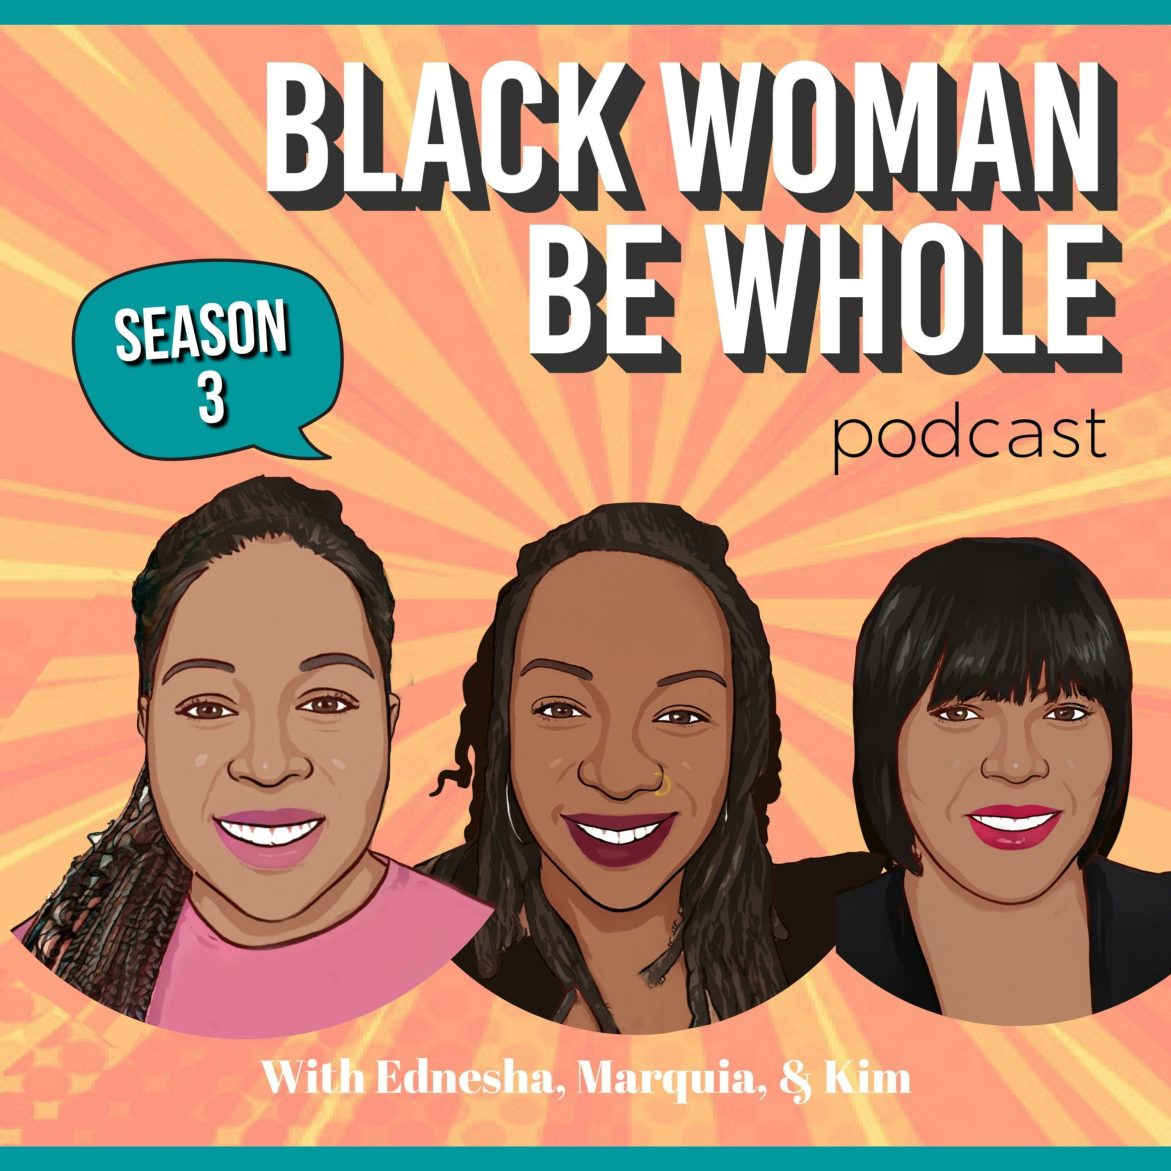 Black Podcasting - We Need Community Care! The Lost Episode